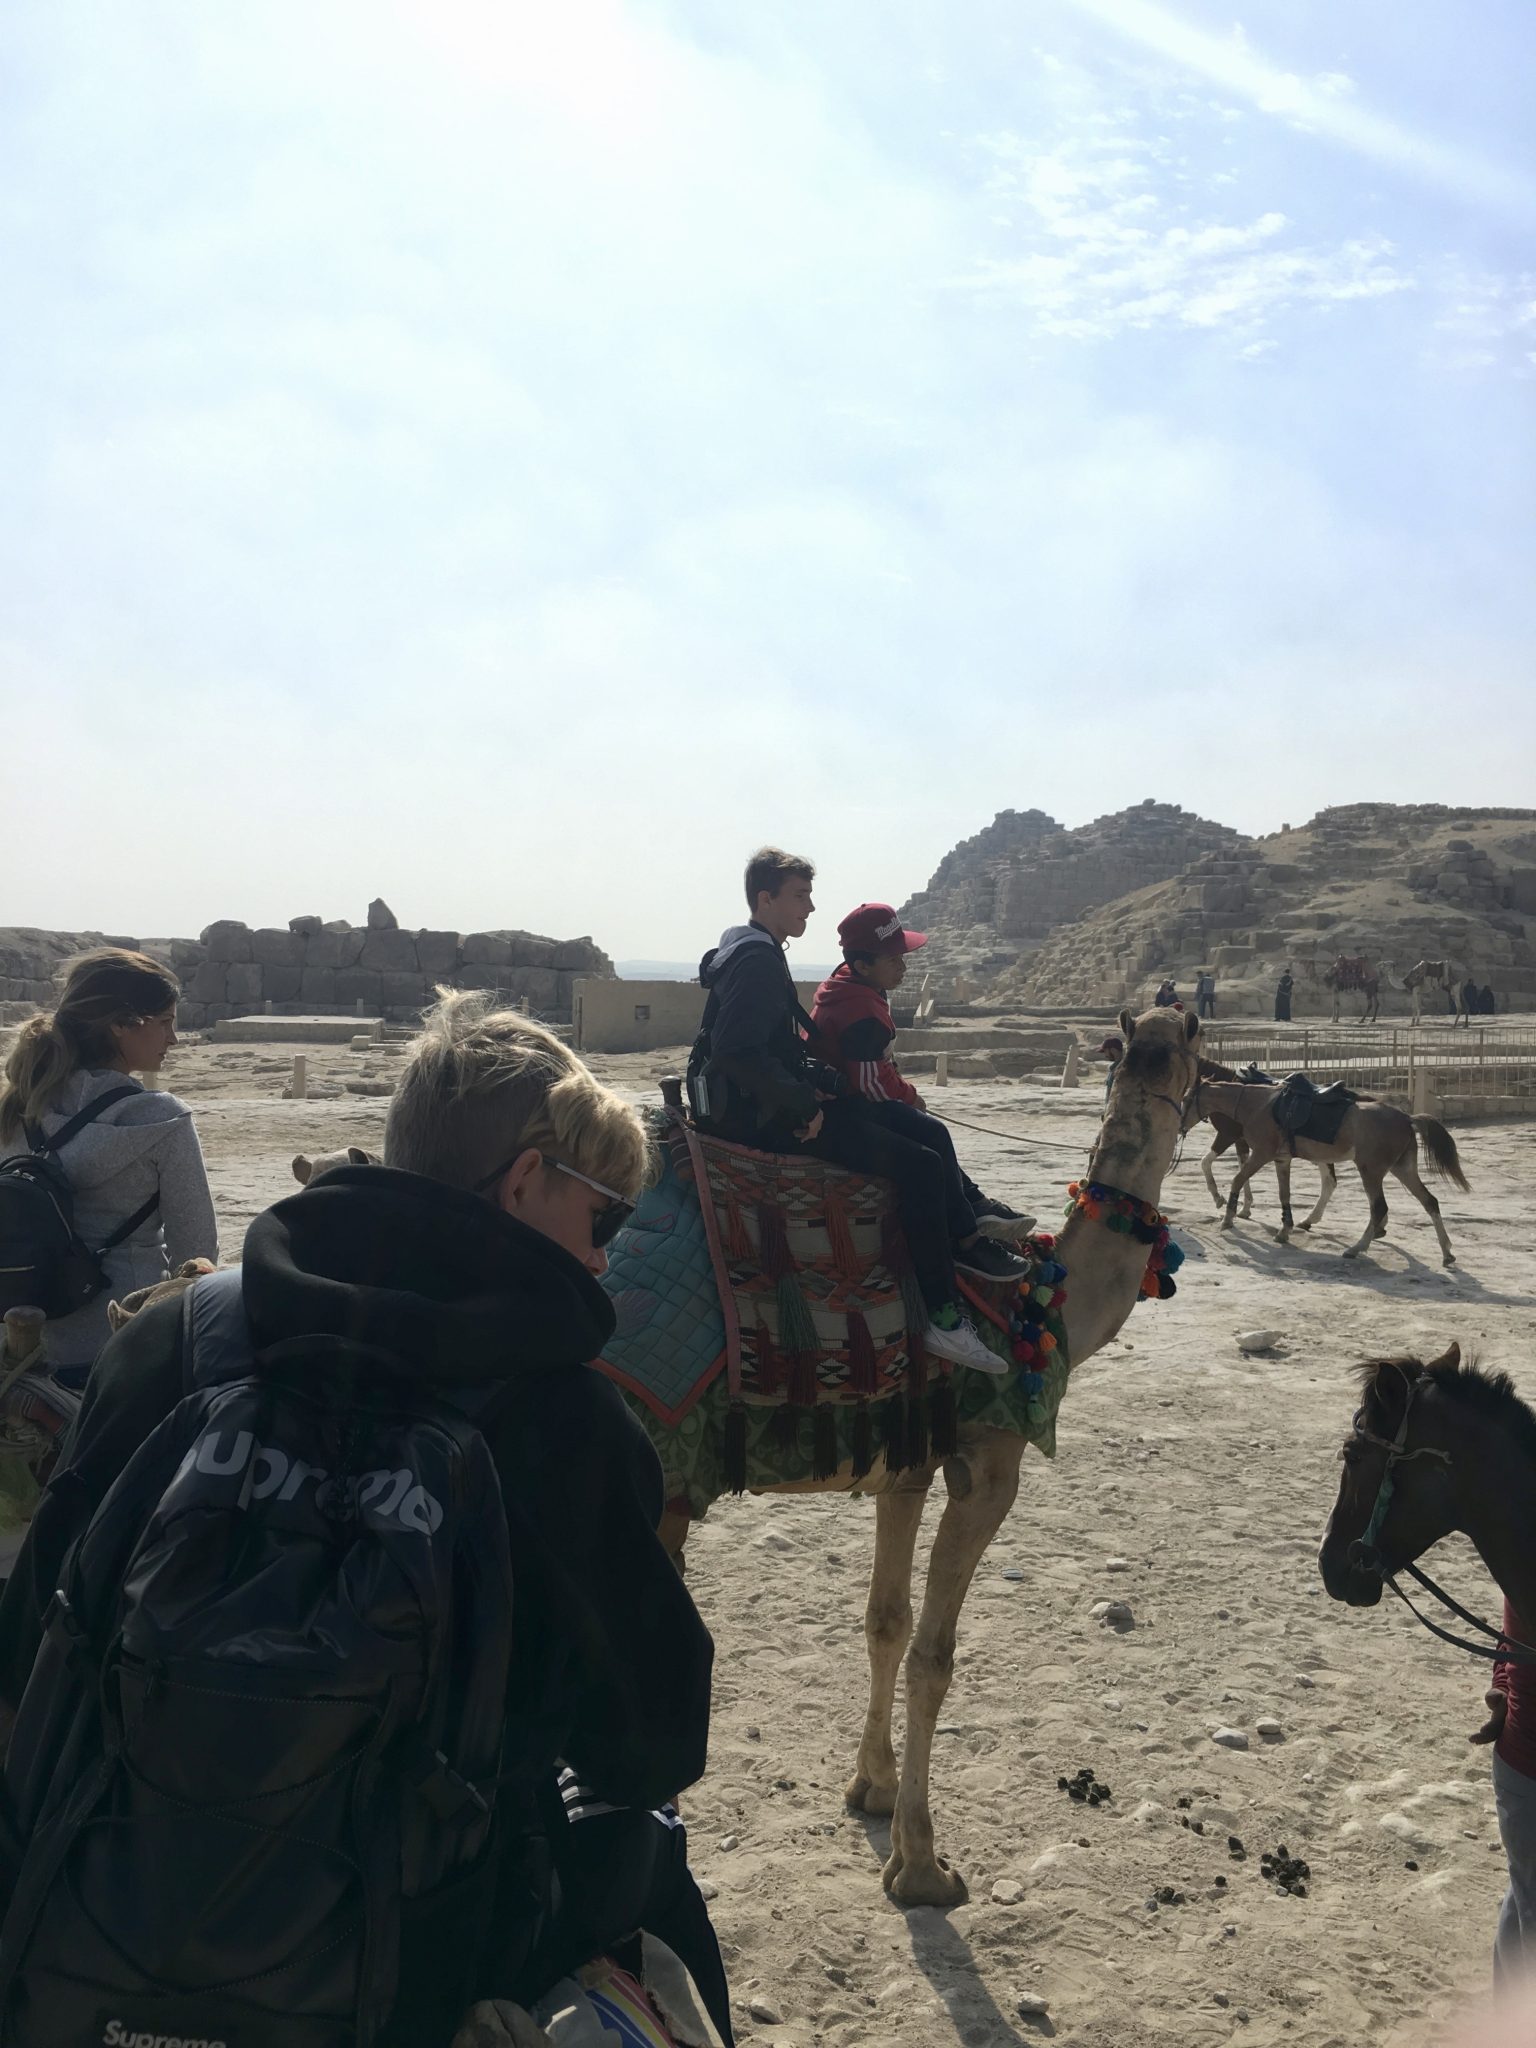 pyramids of giza on camels in cairo